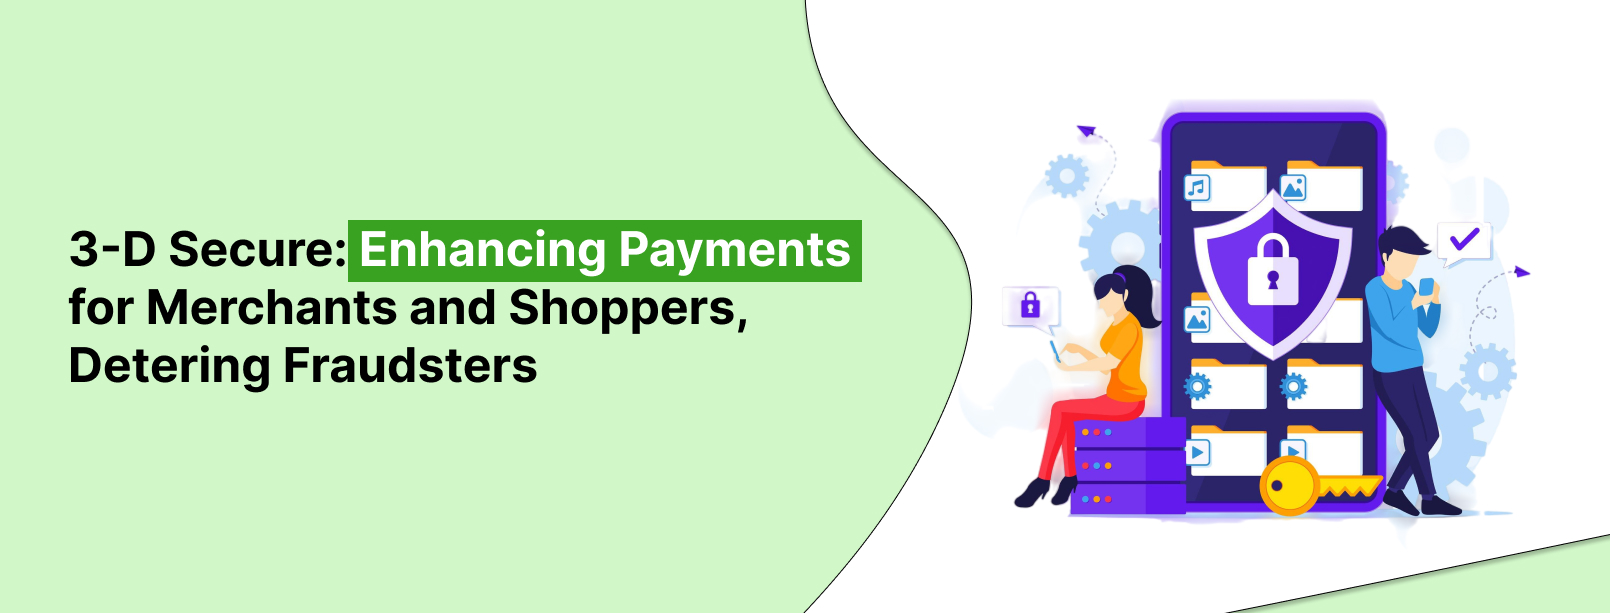 3-D Secure Makes Payments Better for Merchants, Shoppers, Worse for Fraudsters